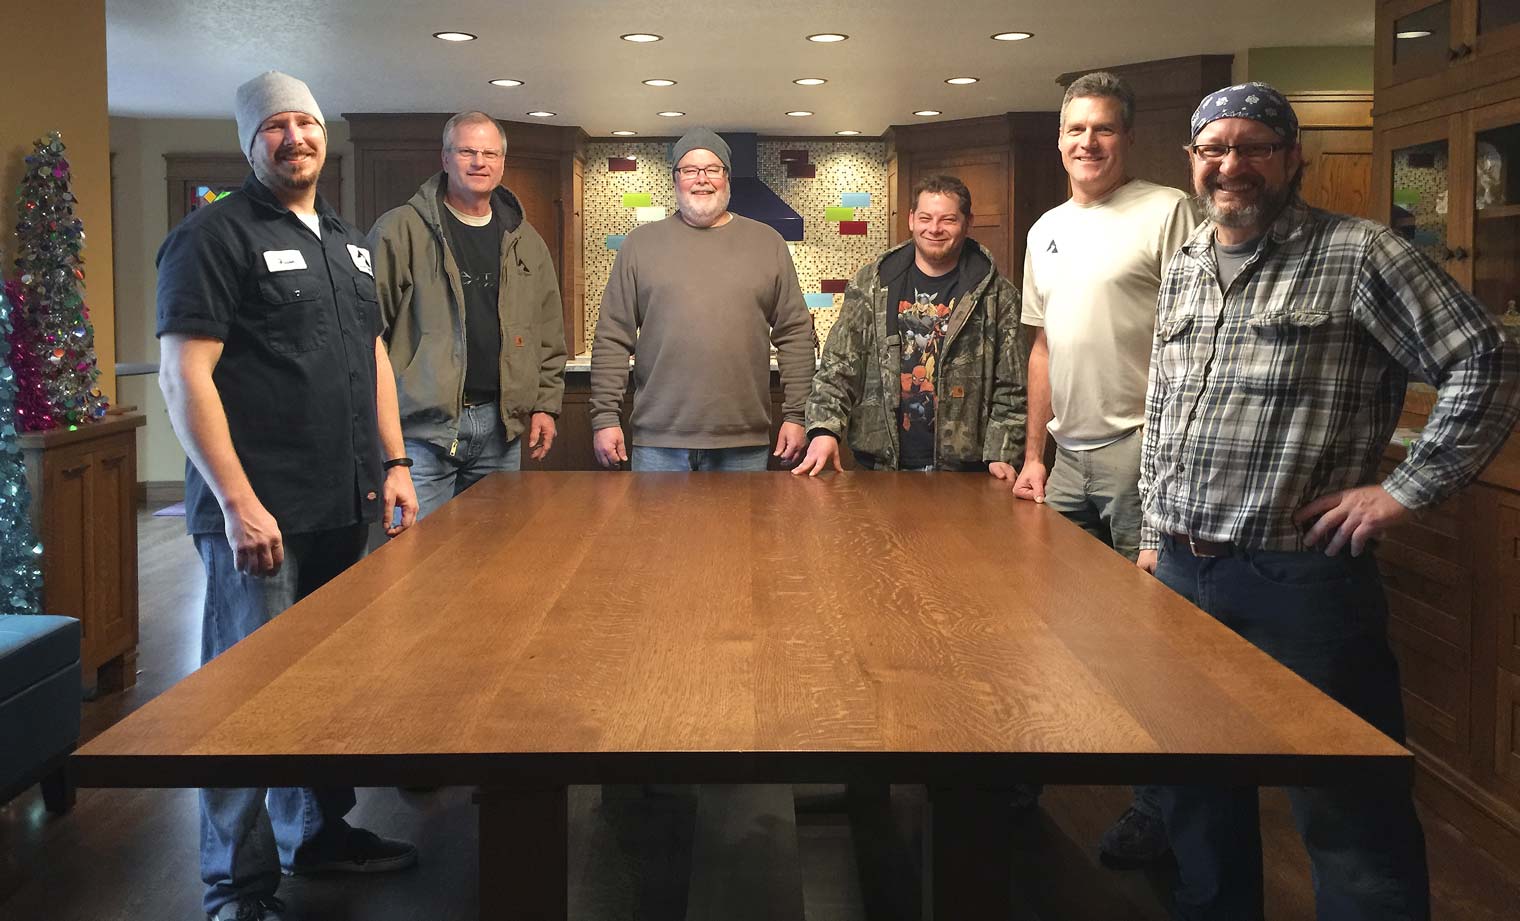 Silent Rivers artisans install the custom dining room table they built for a client who wanted to surprise his wife.